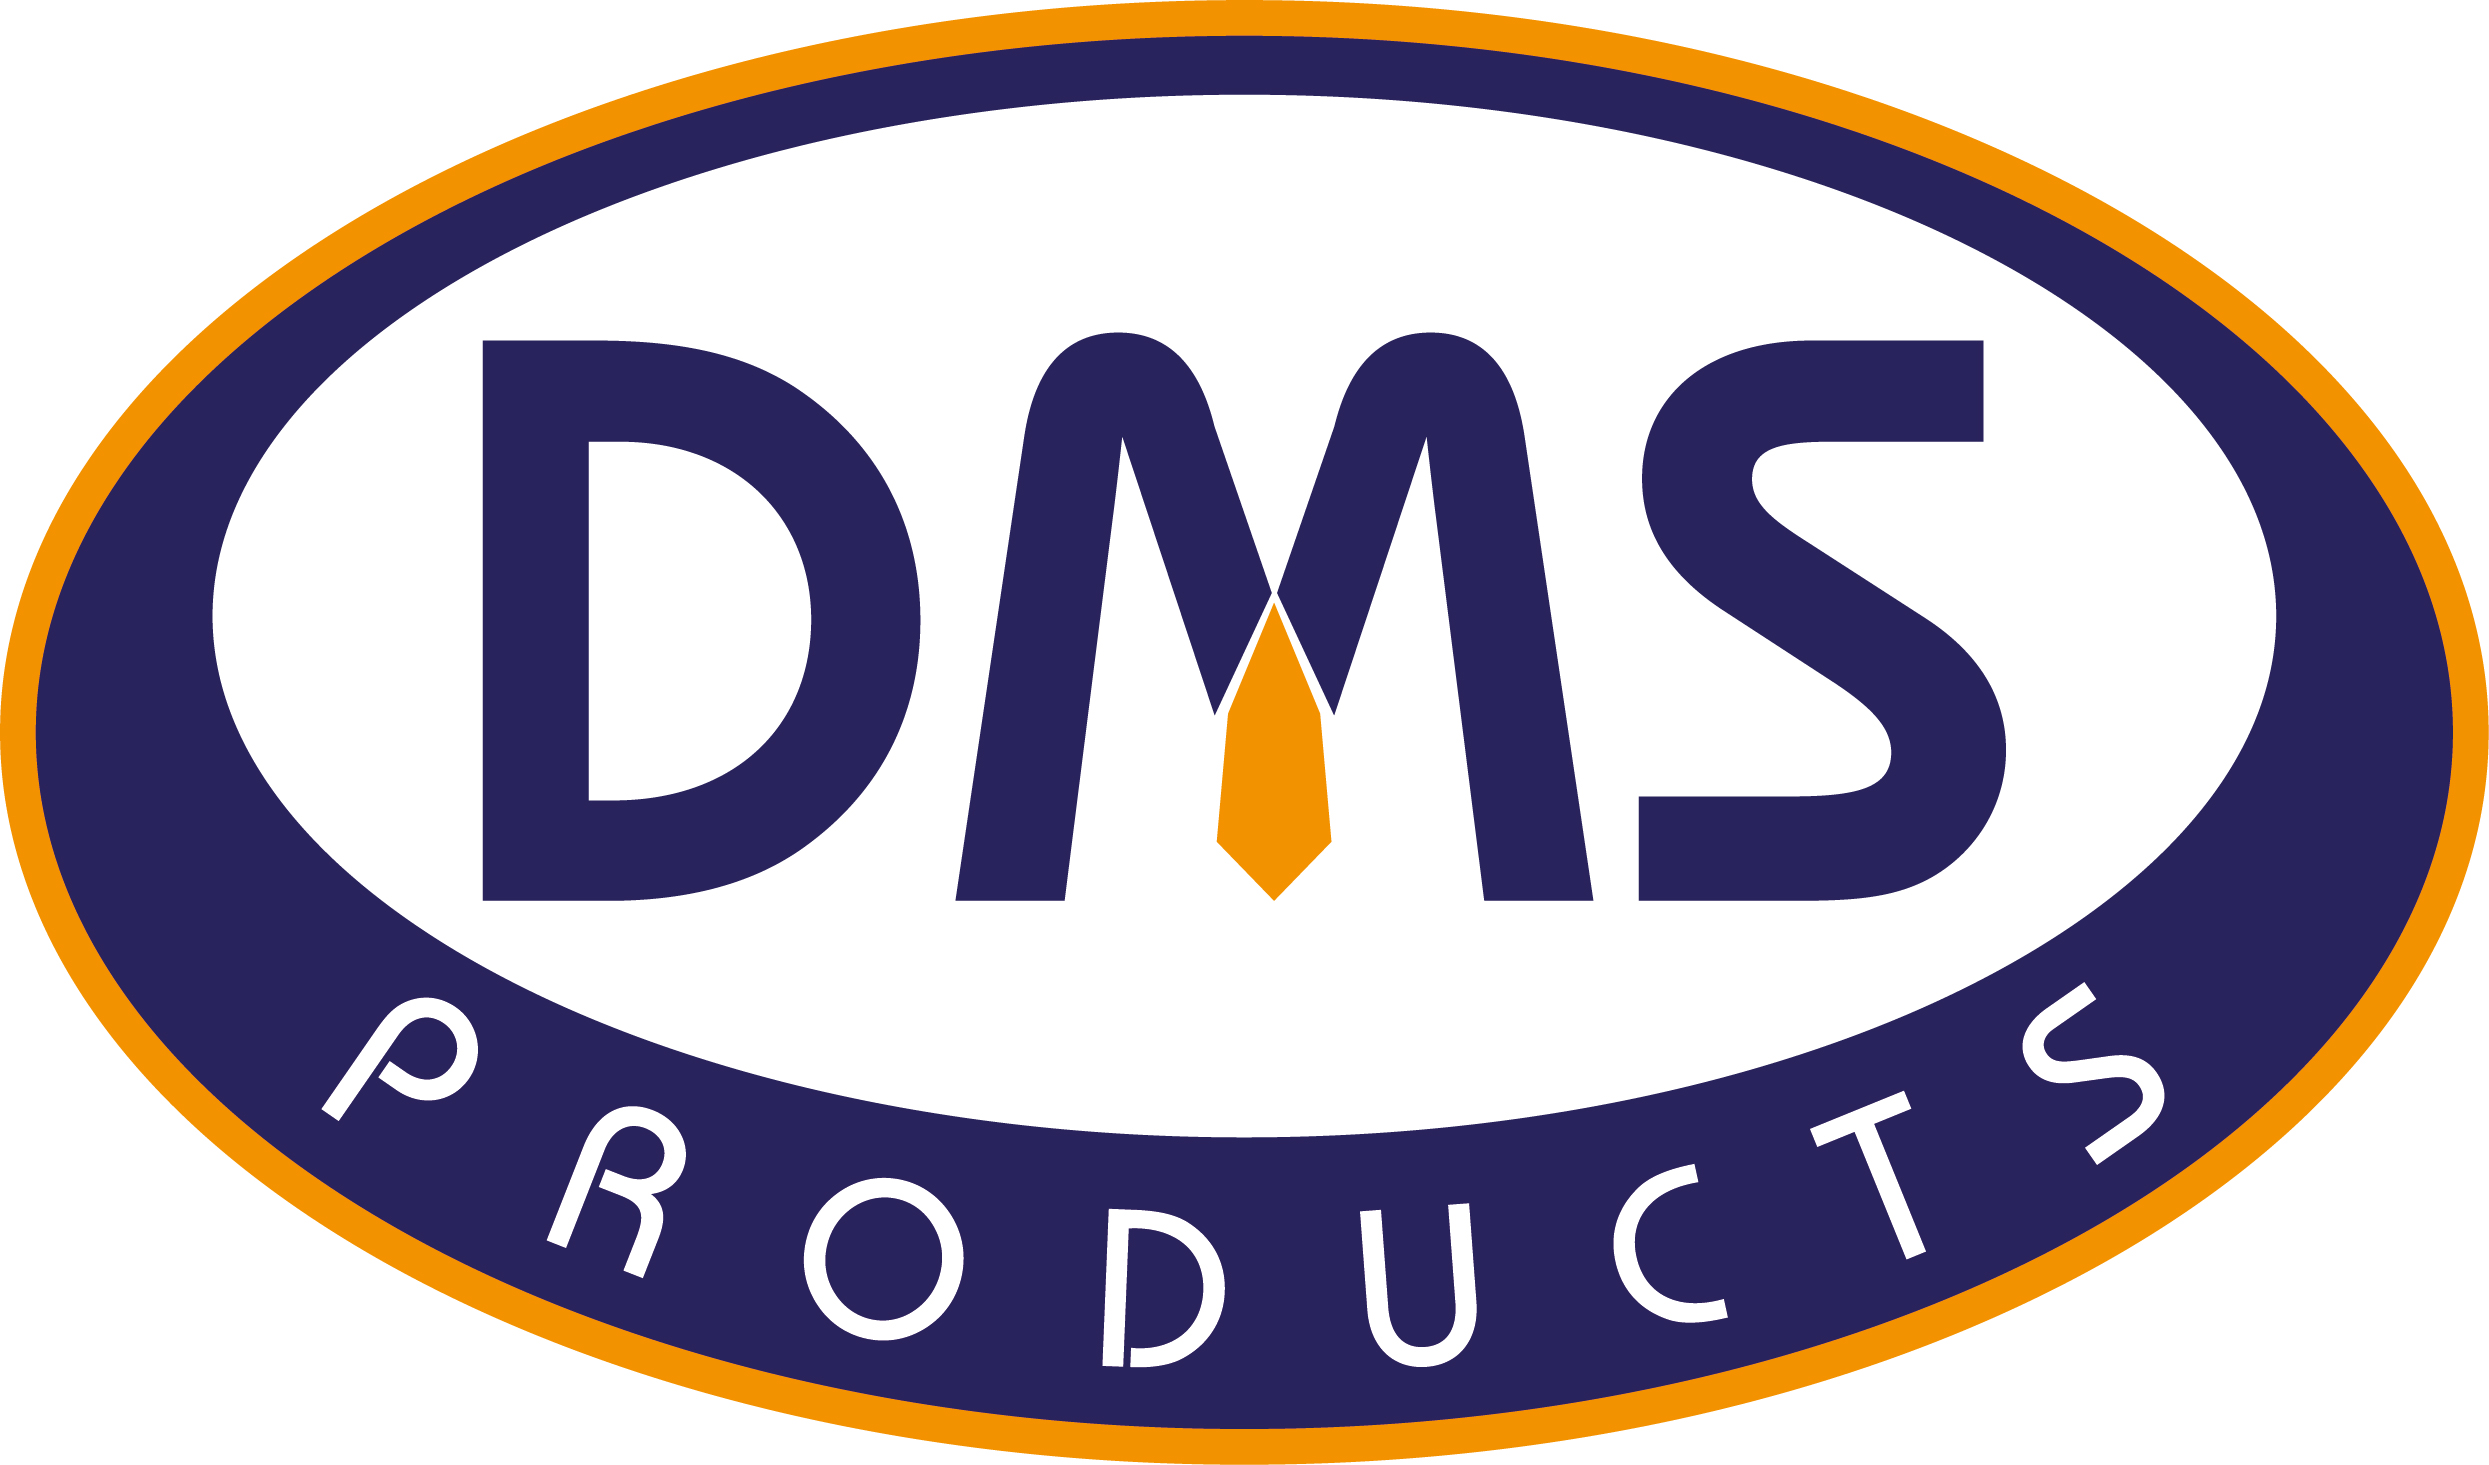 DMS Products